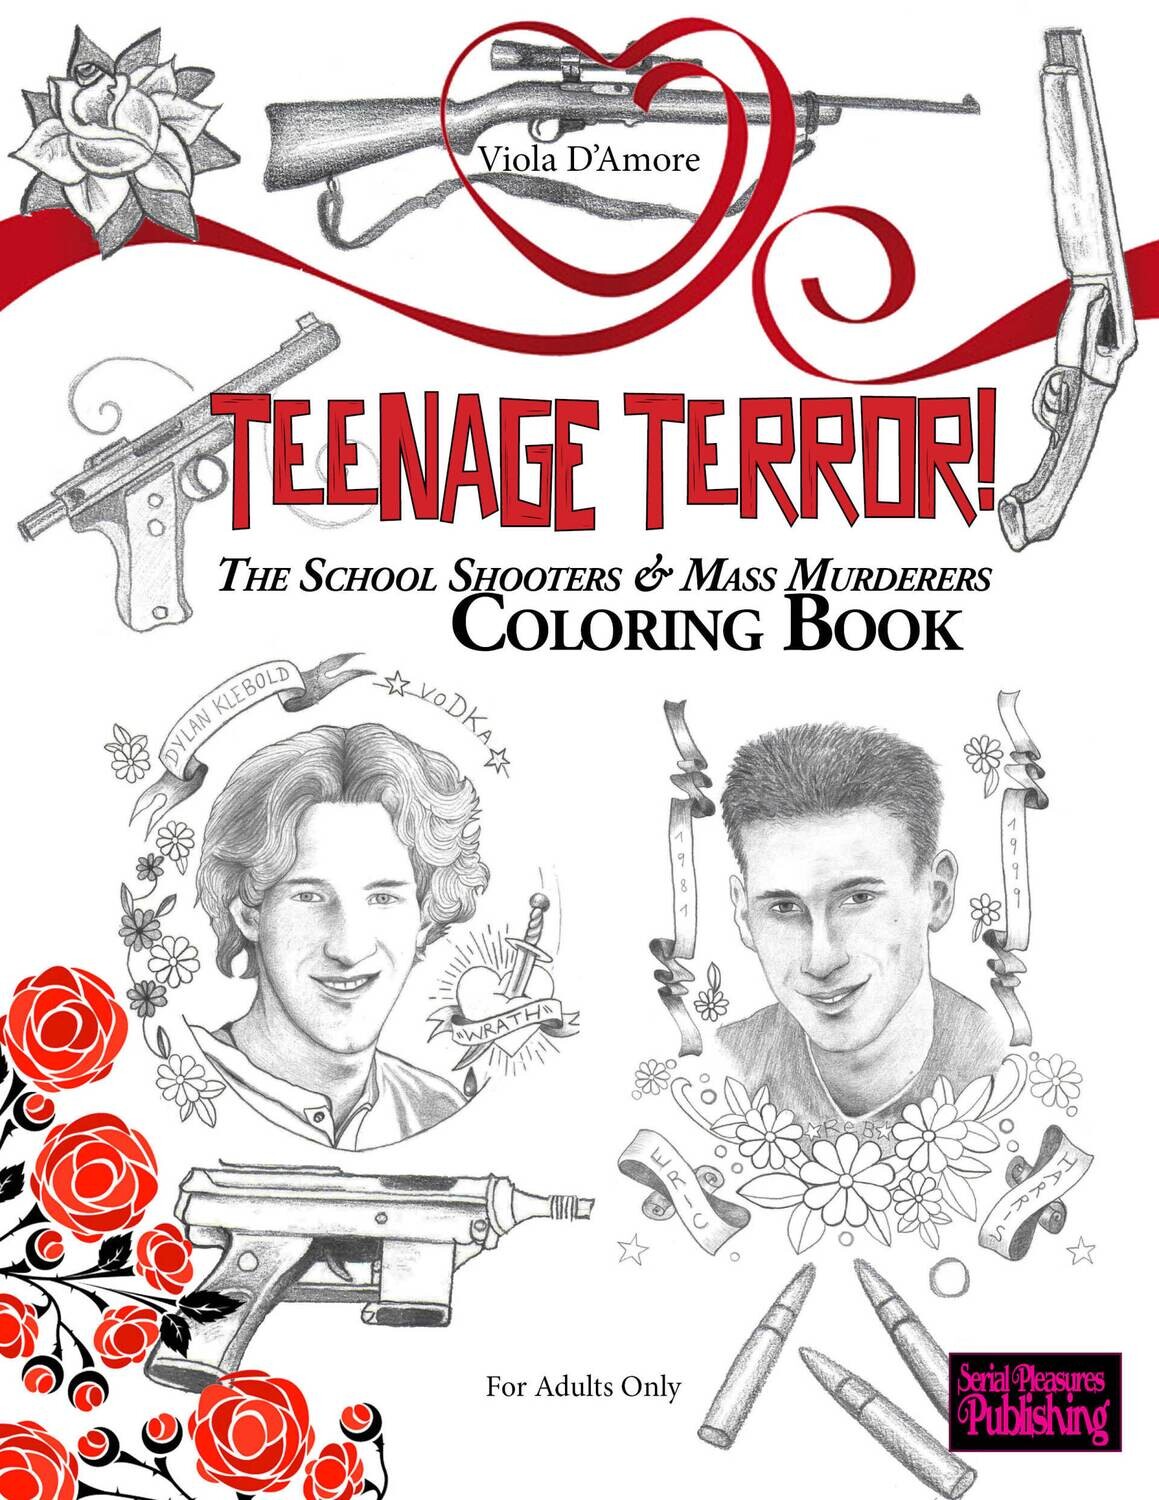 Teenage Terror! The School Shooters & Mass Murderers Coloring Book (collector edition)